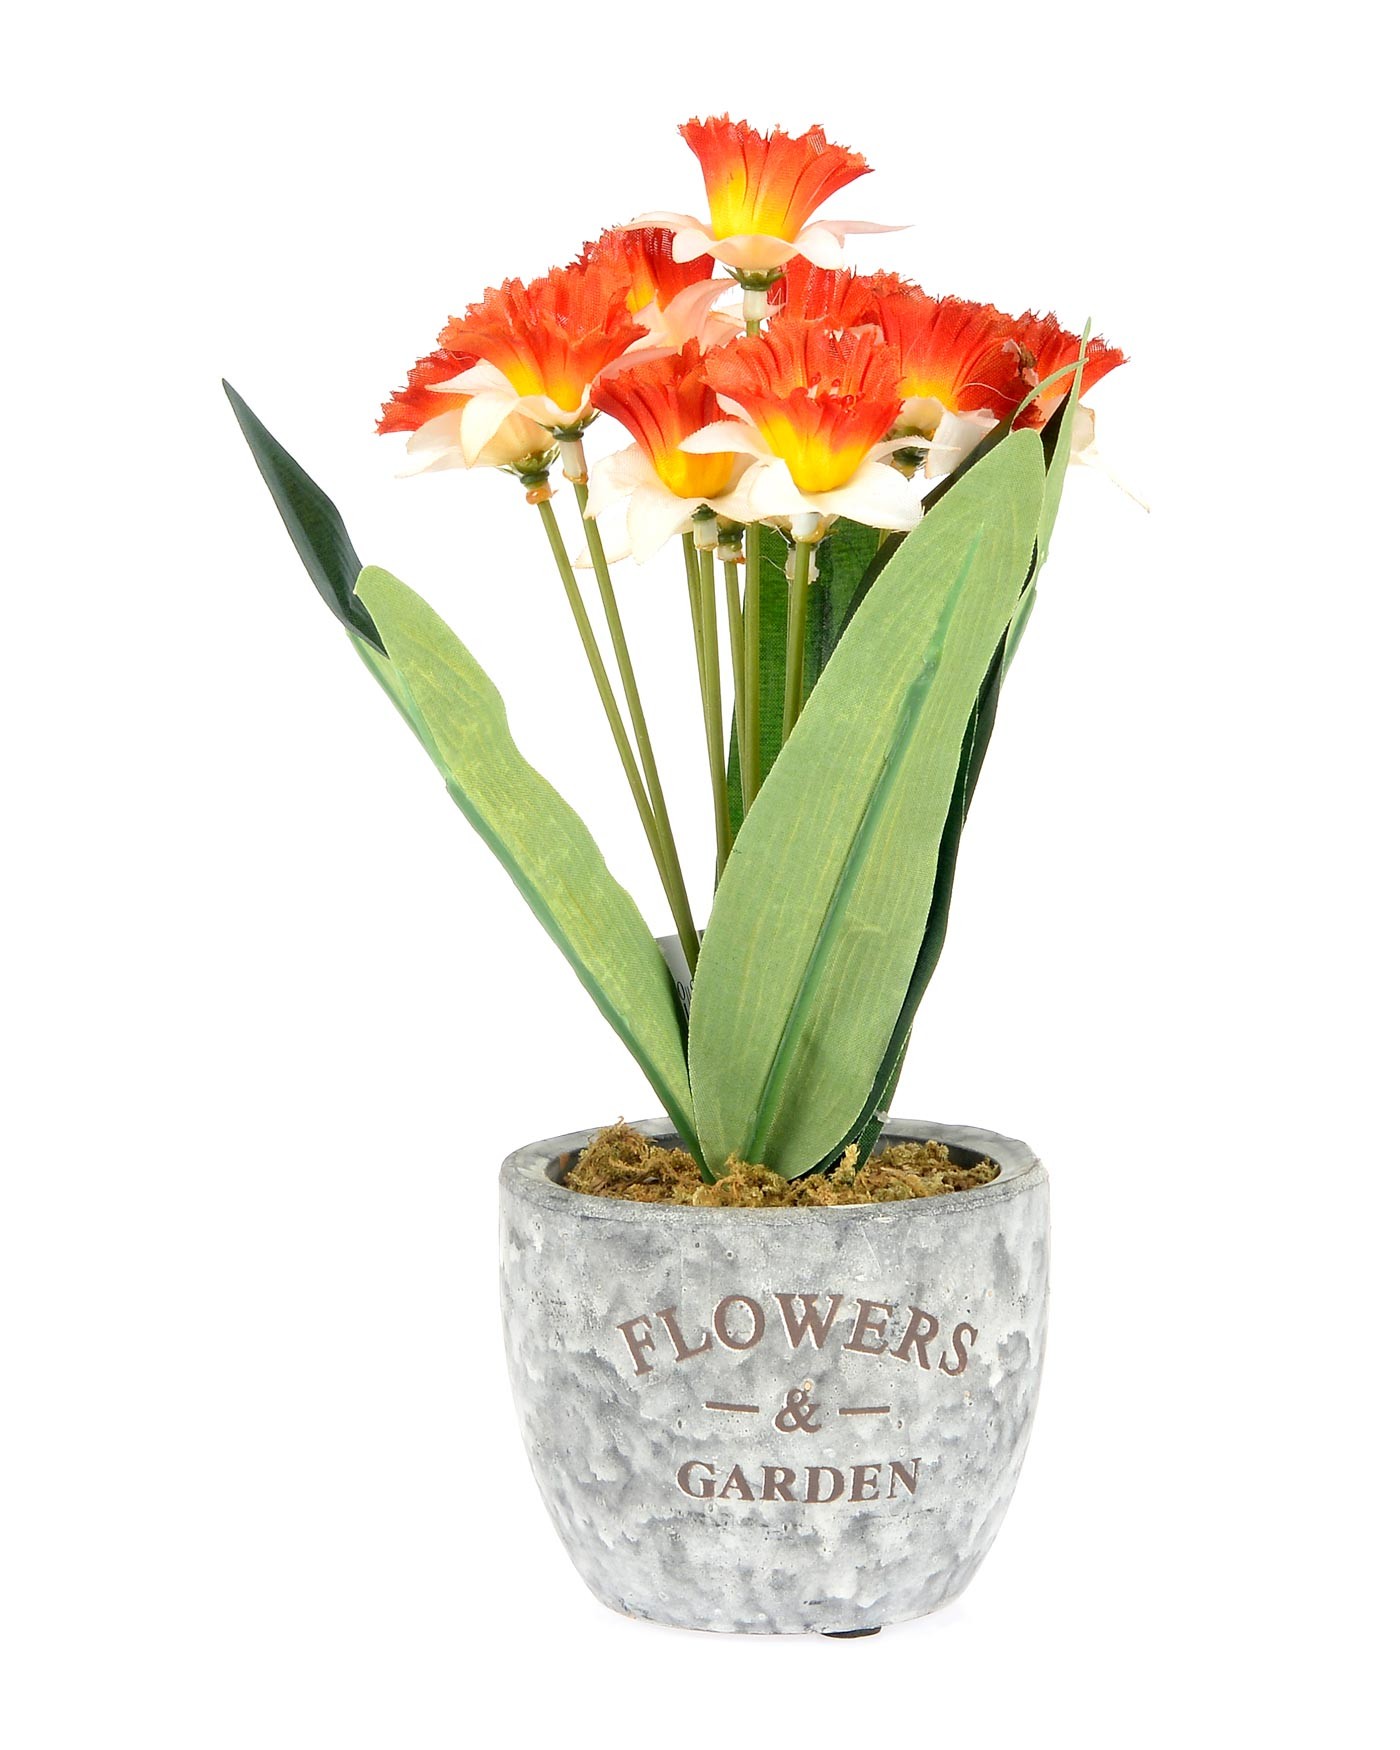 Artificial Orange and Cream Narcissus Daffodil in Textured Pot ...